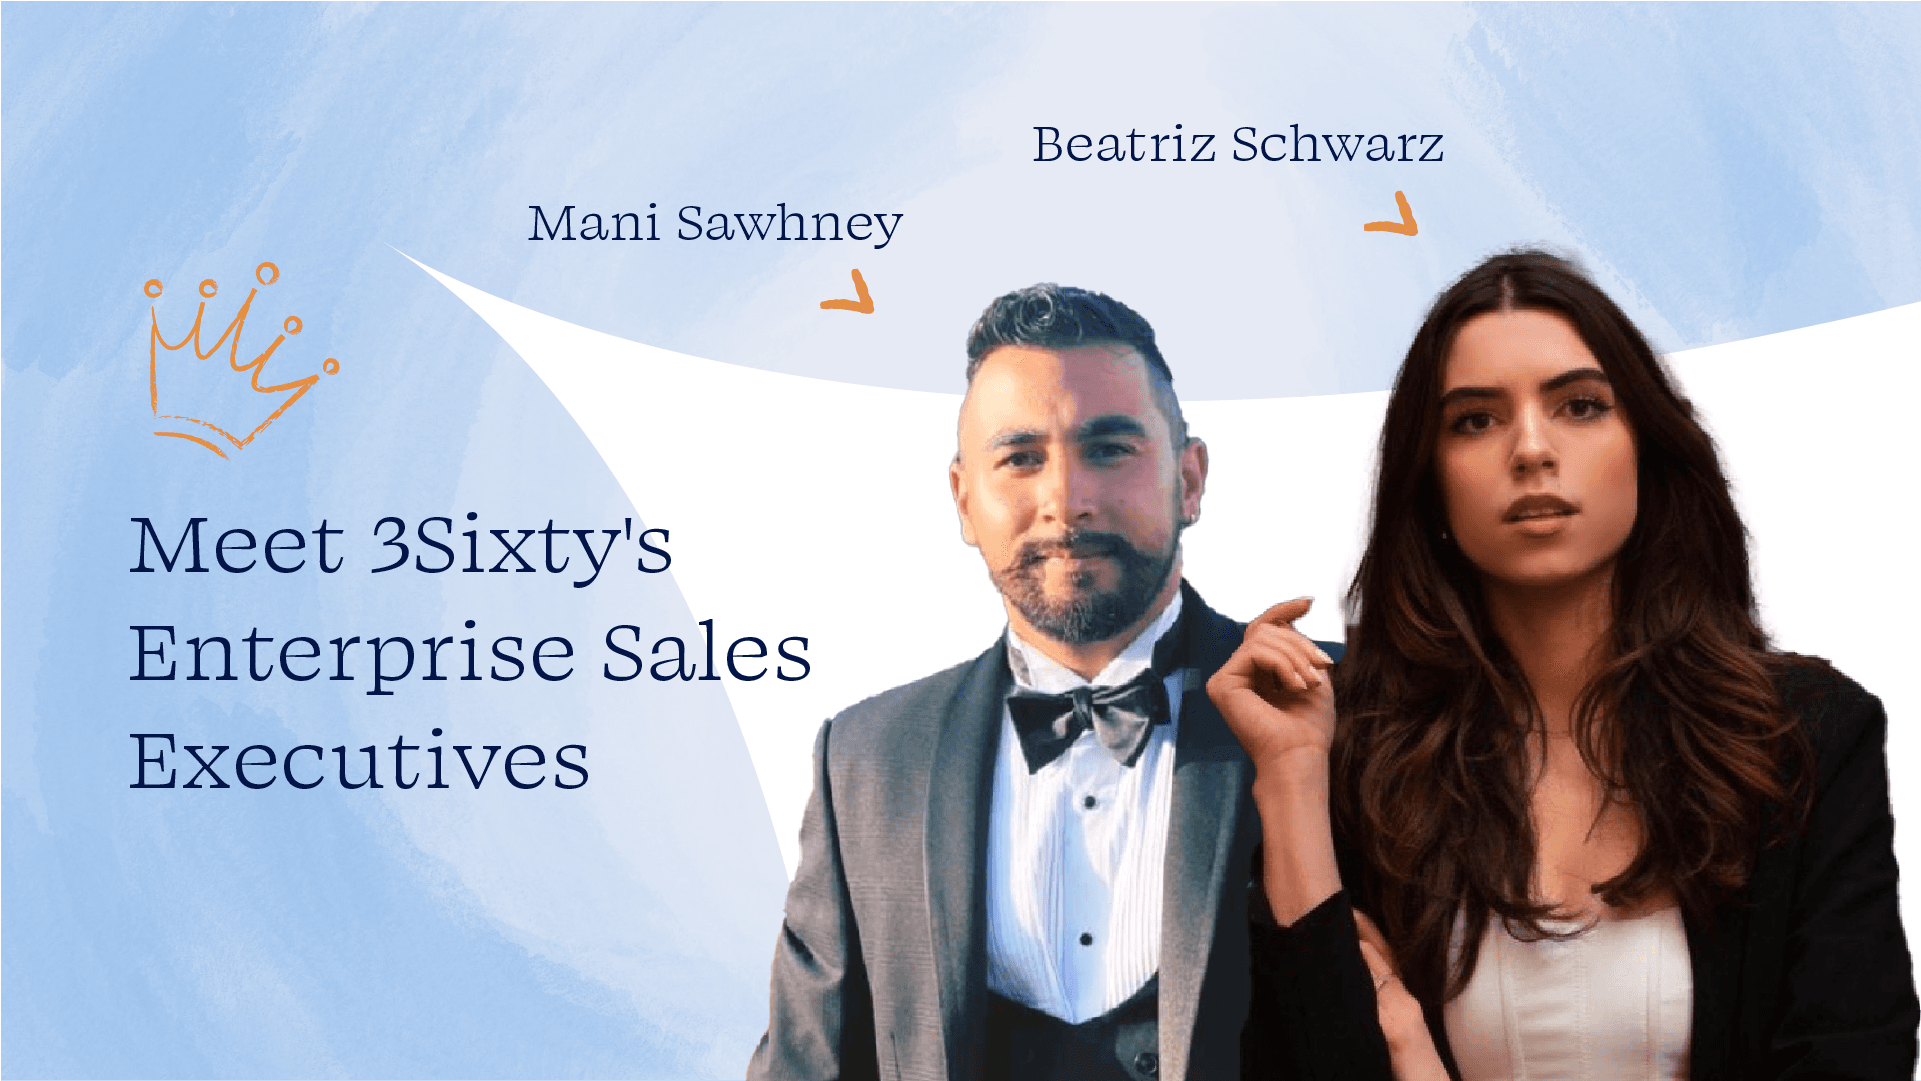 Q&A with Enterprise Sales Executives Beatriz and Mani